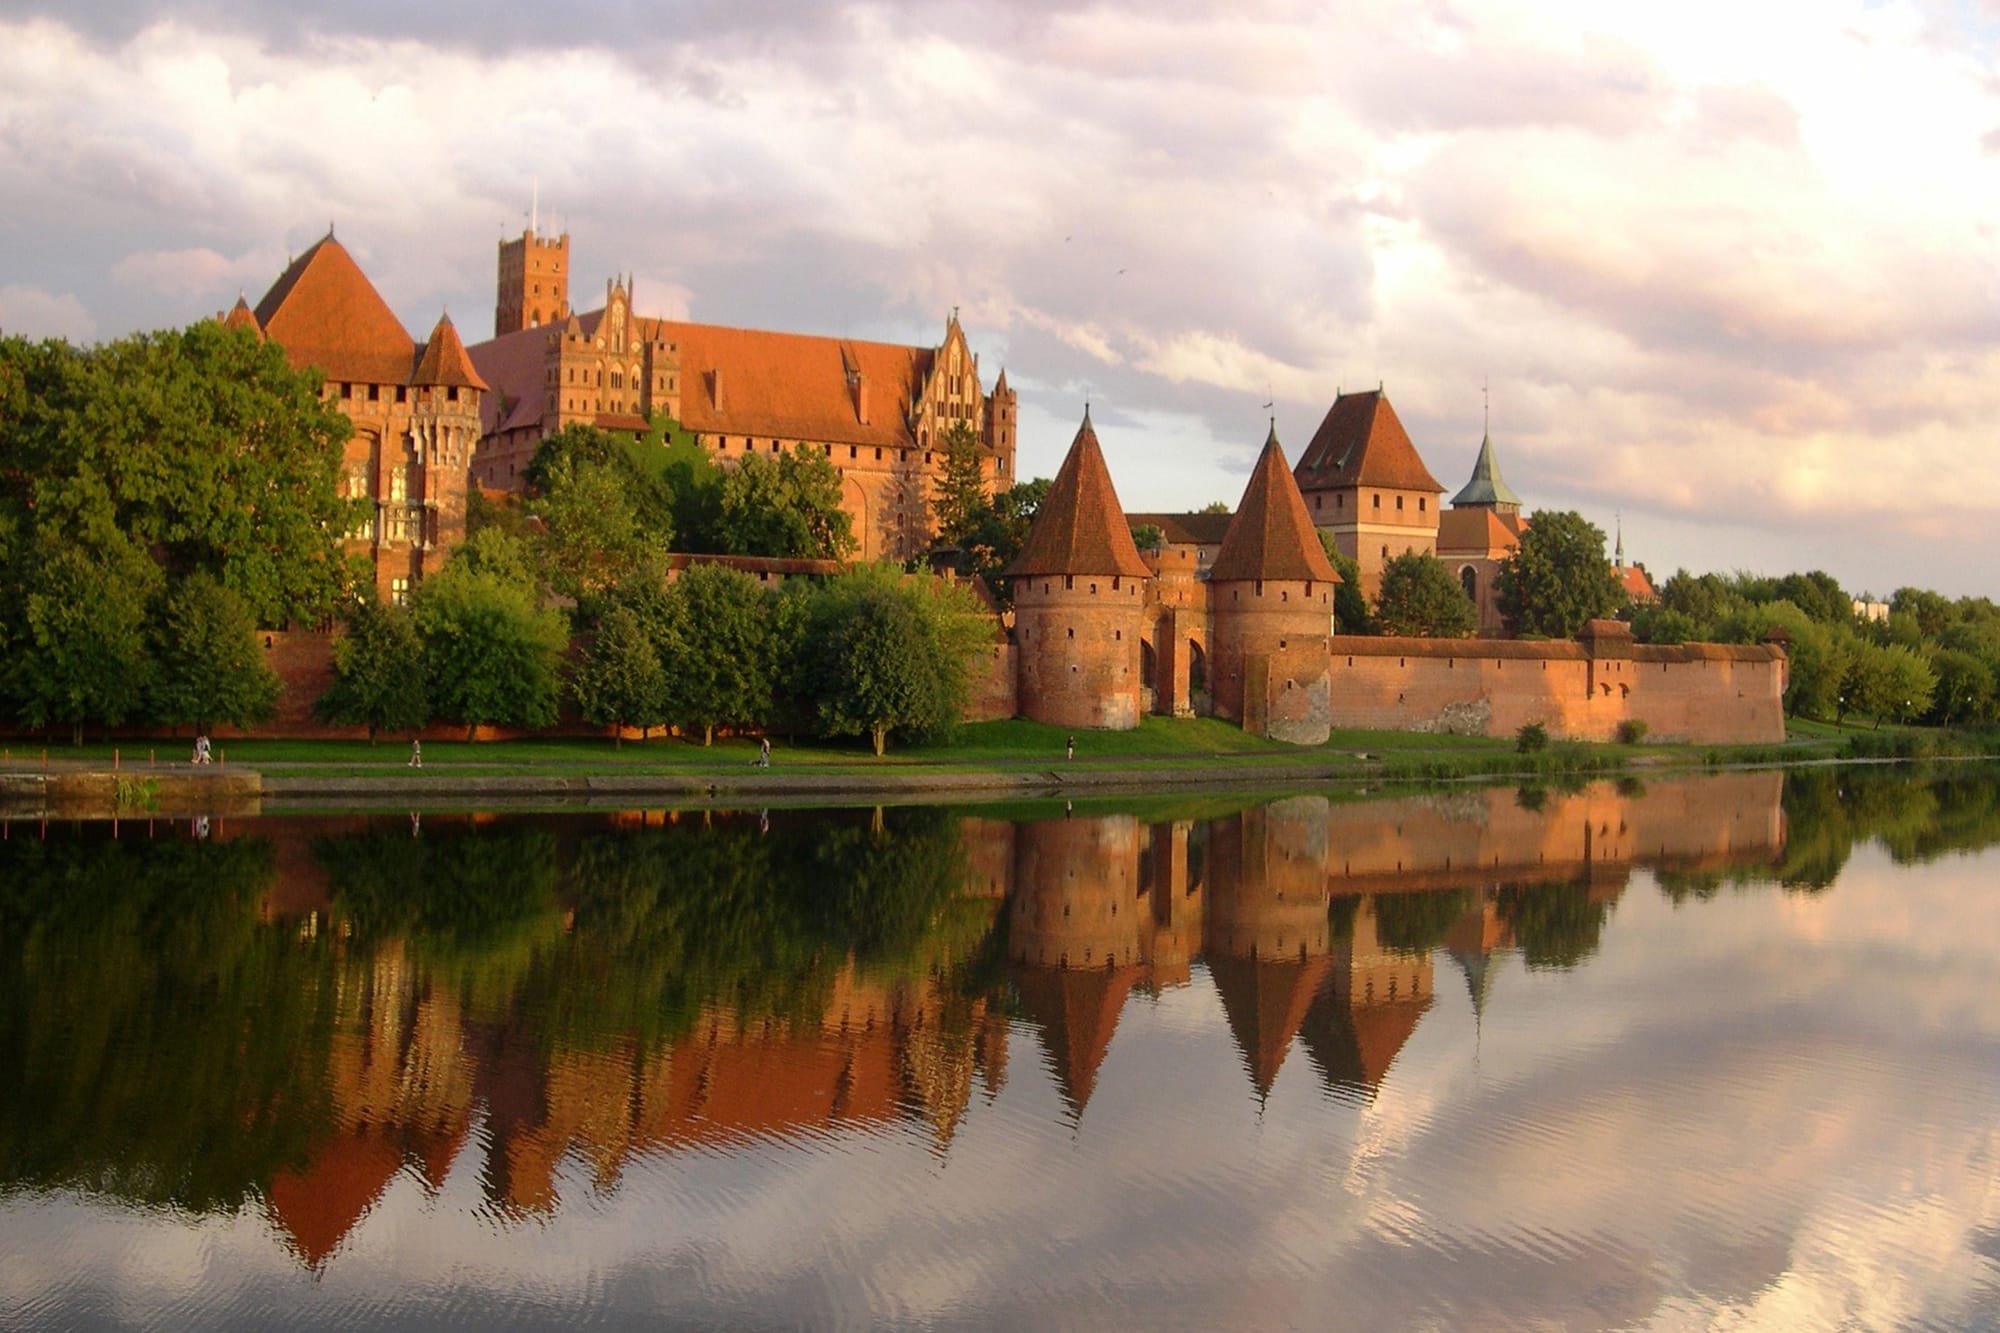 Malbork Caste - An easy day trip from Gdansk by train or guided tour